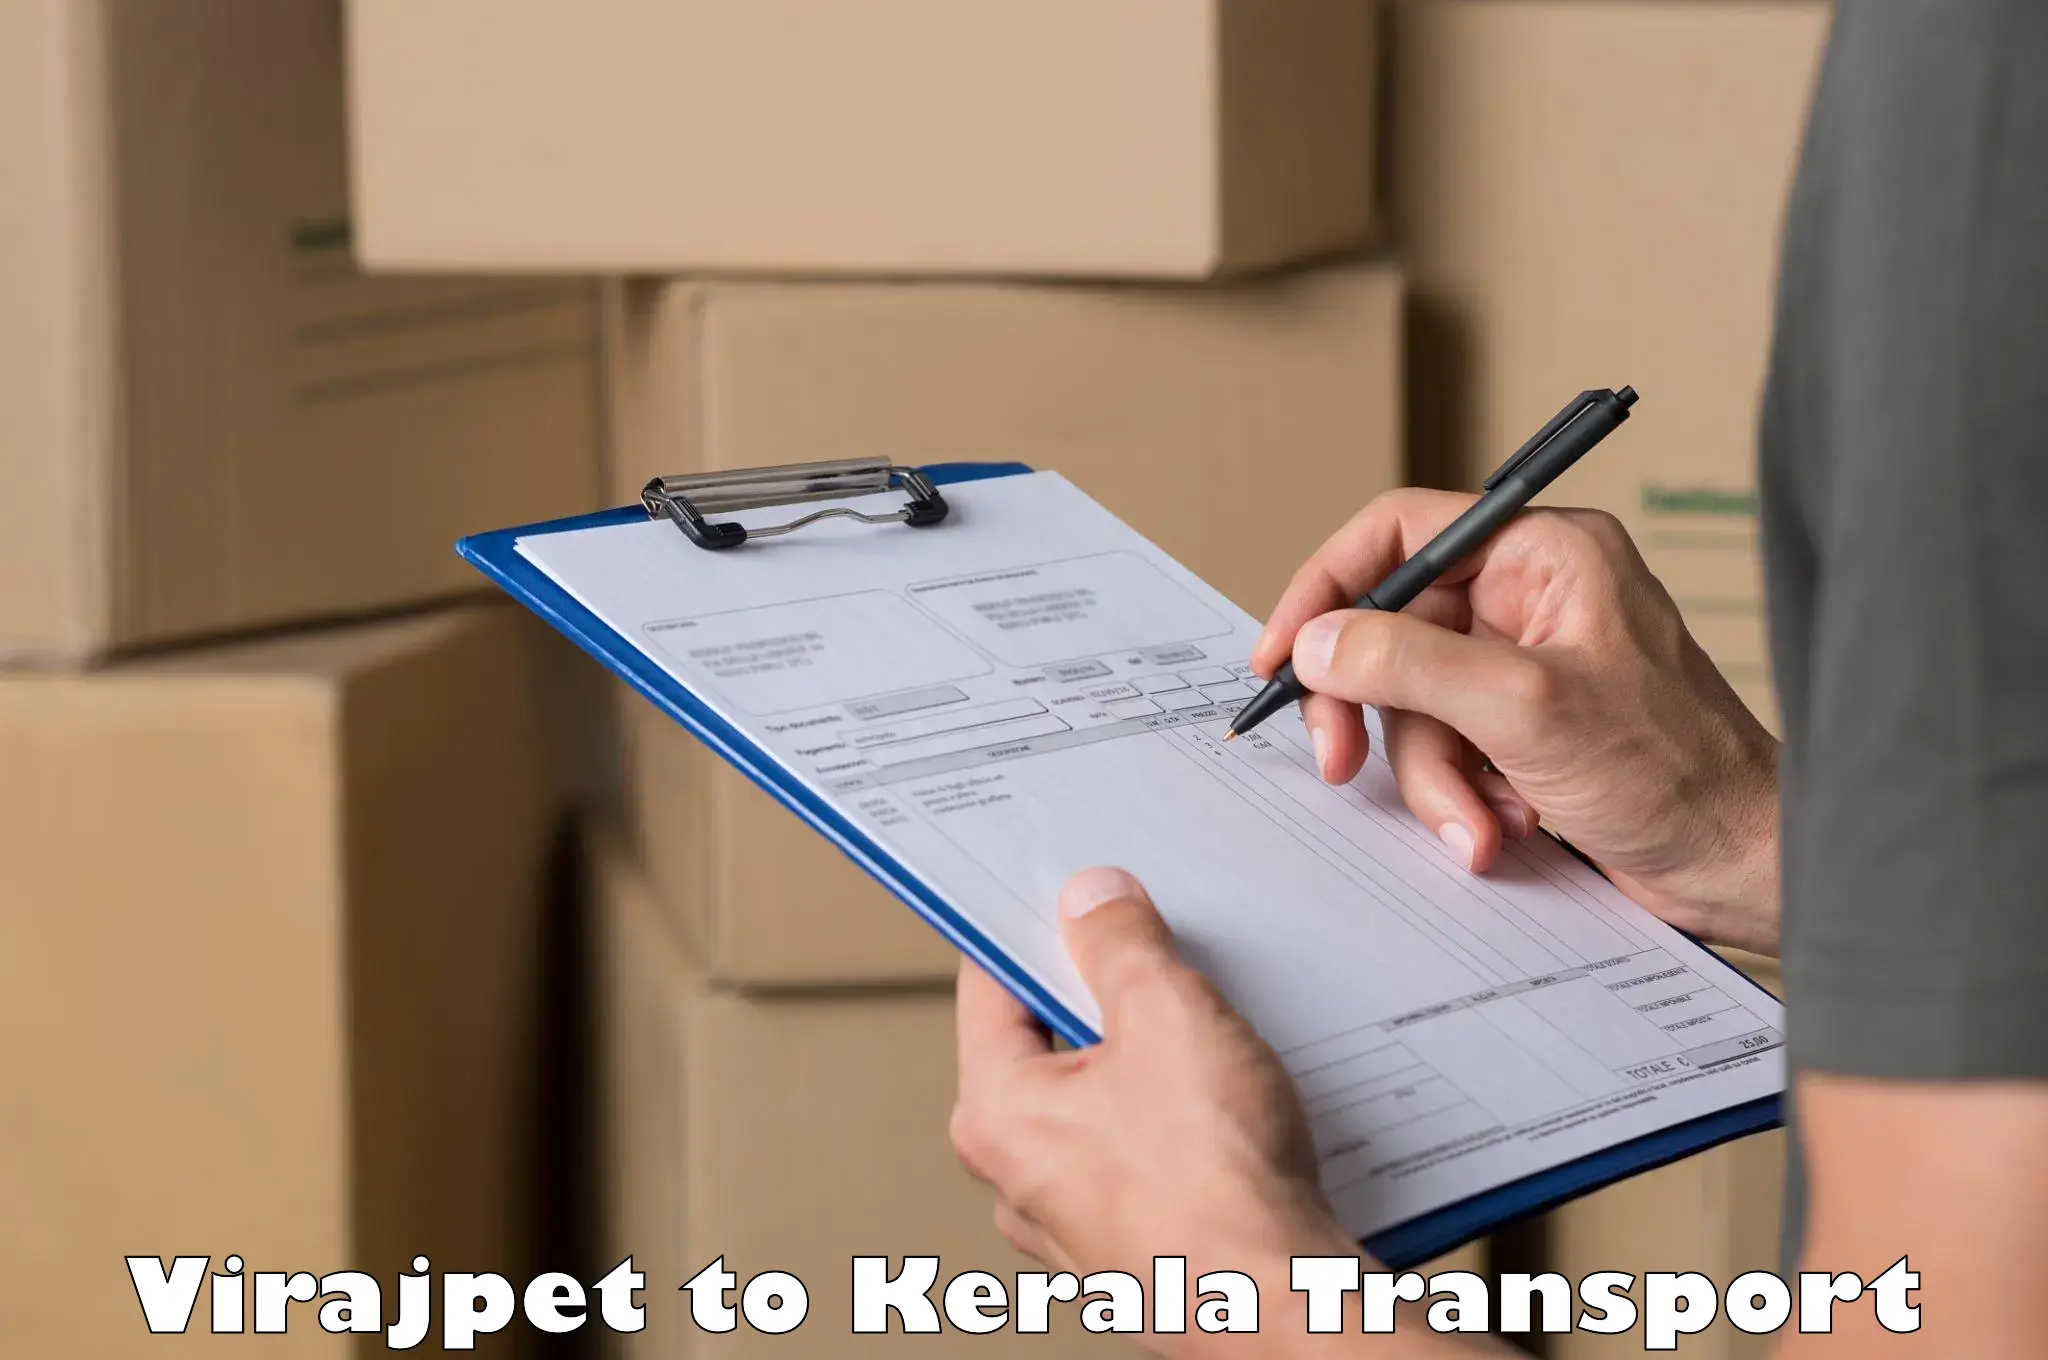 Express transport services in Virajpet to Mahe